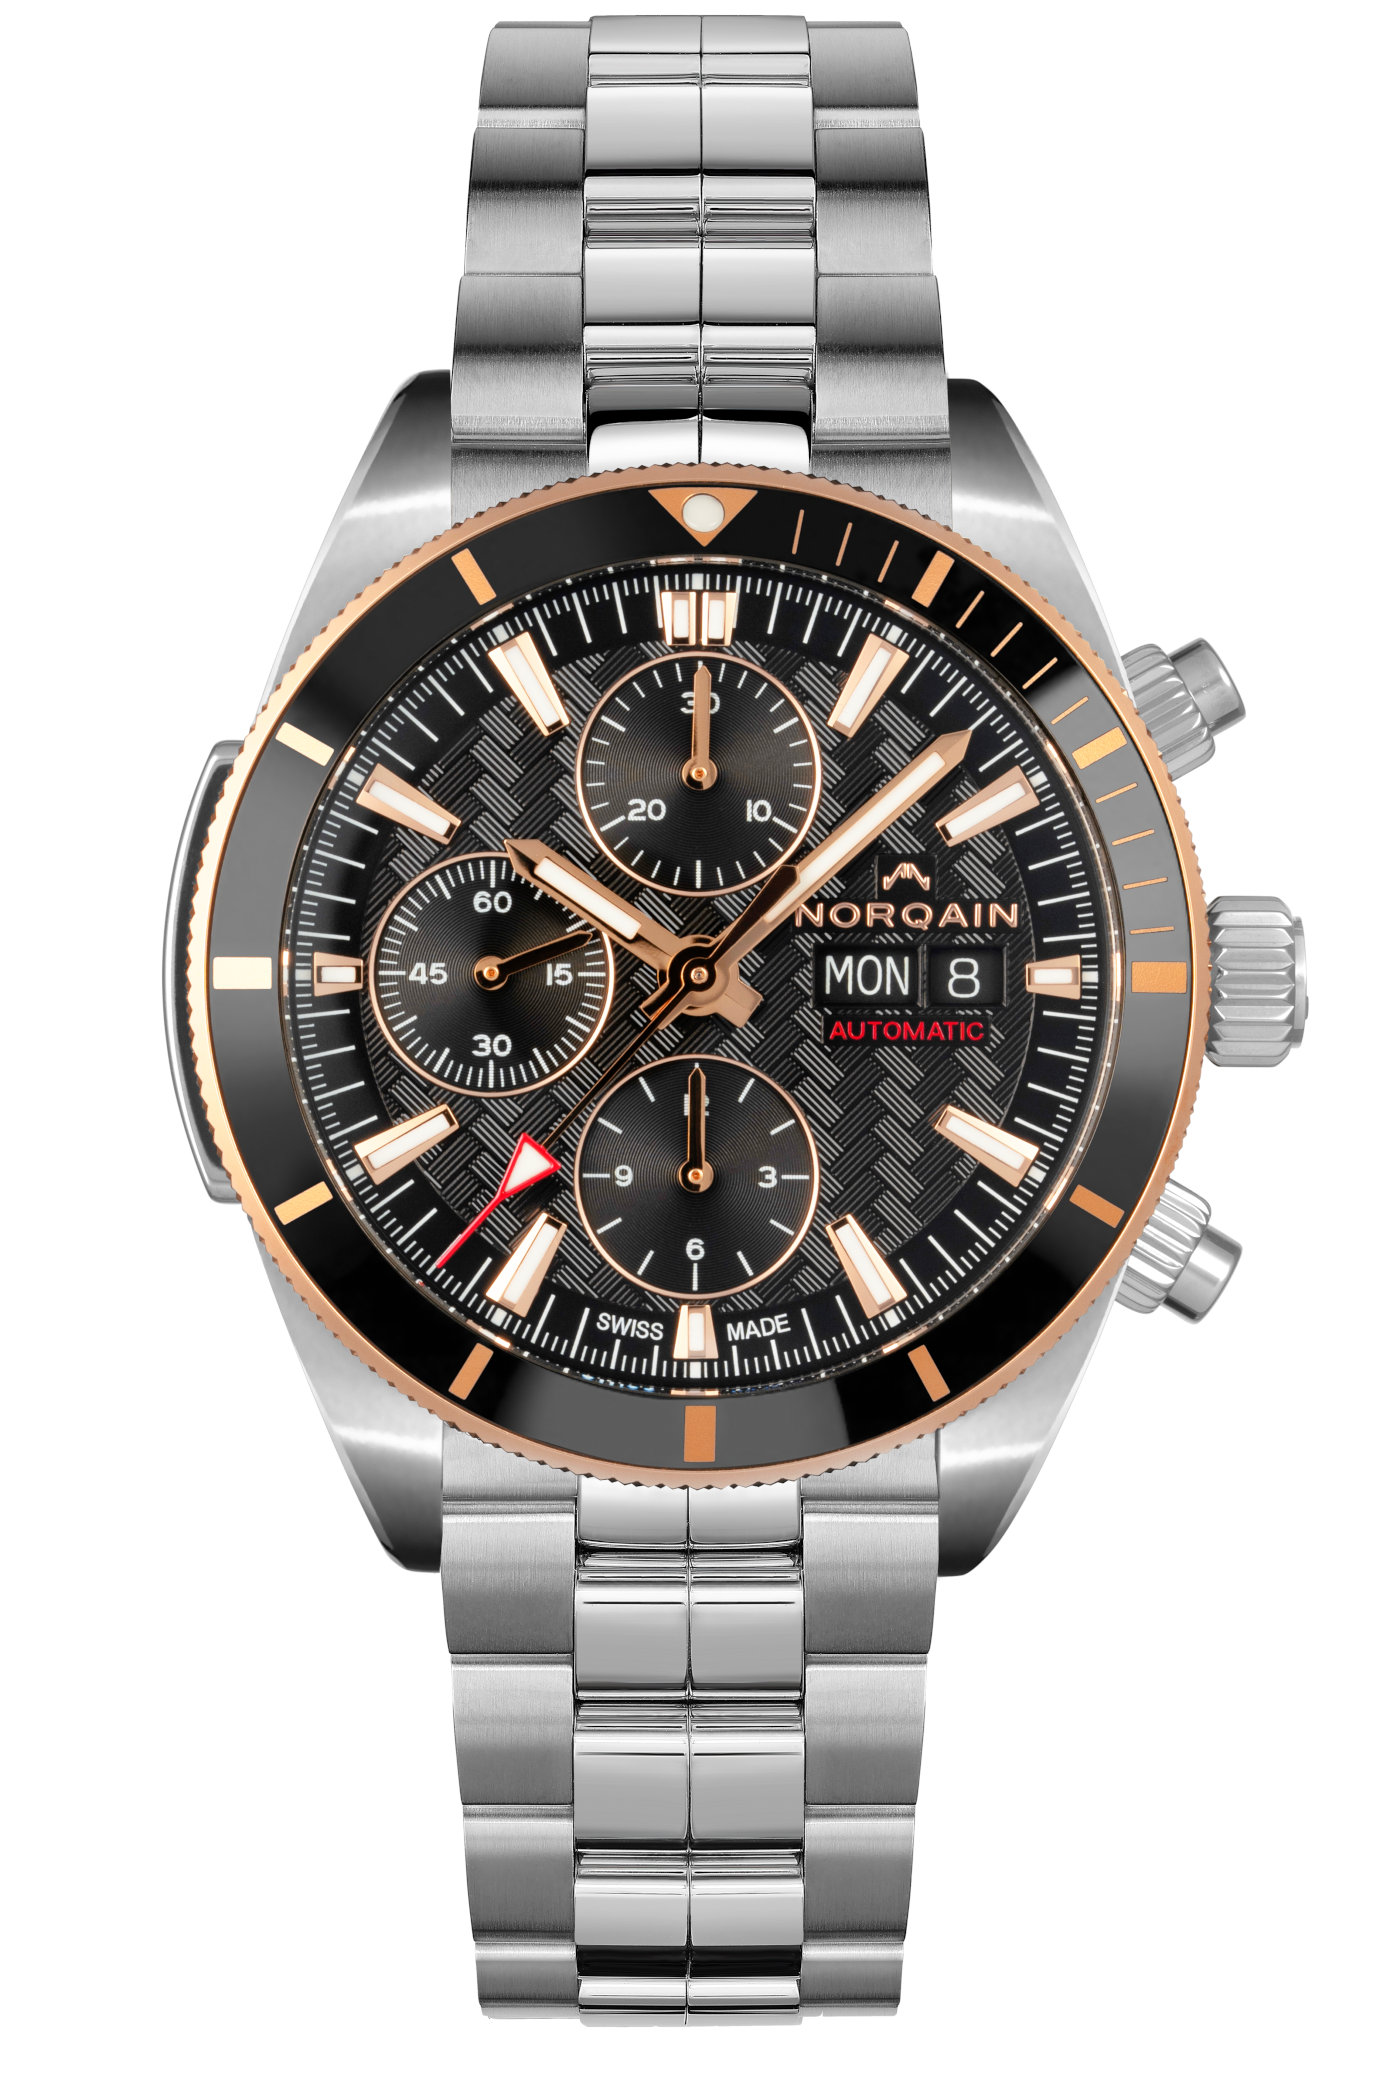 Norqain Adventure Sport Chrono Day-Date two-tone steel & gold - 6